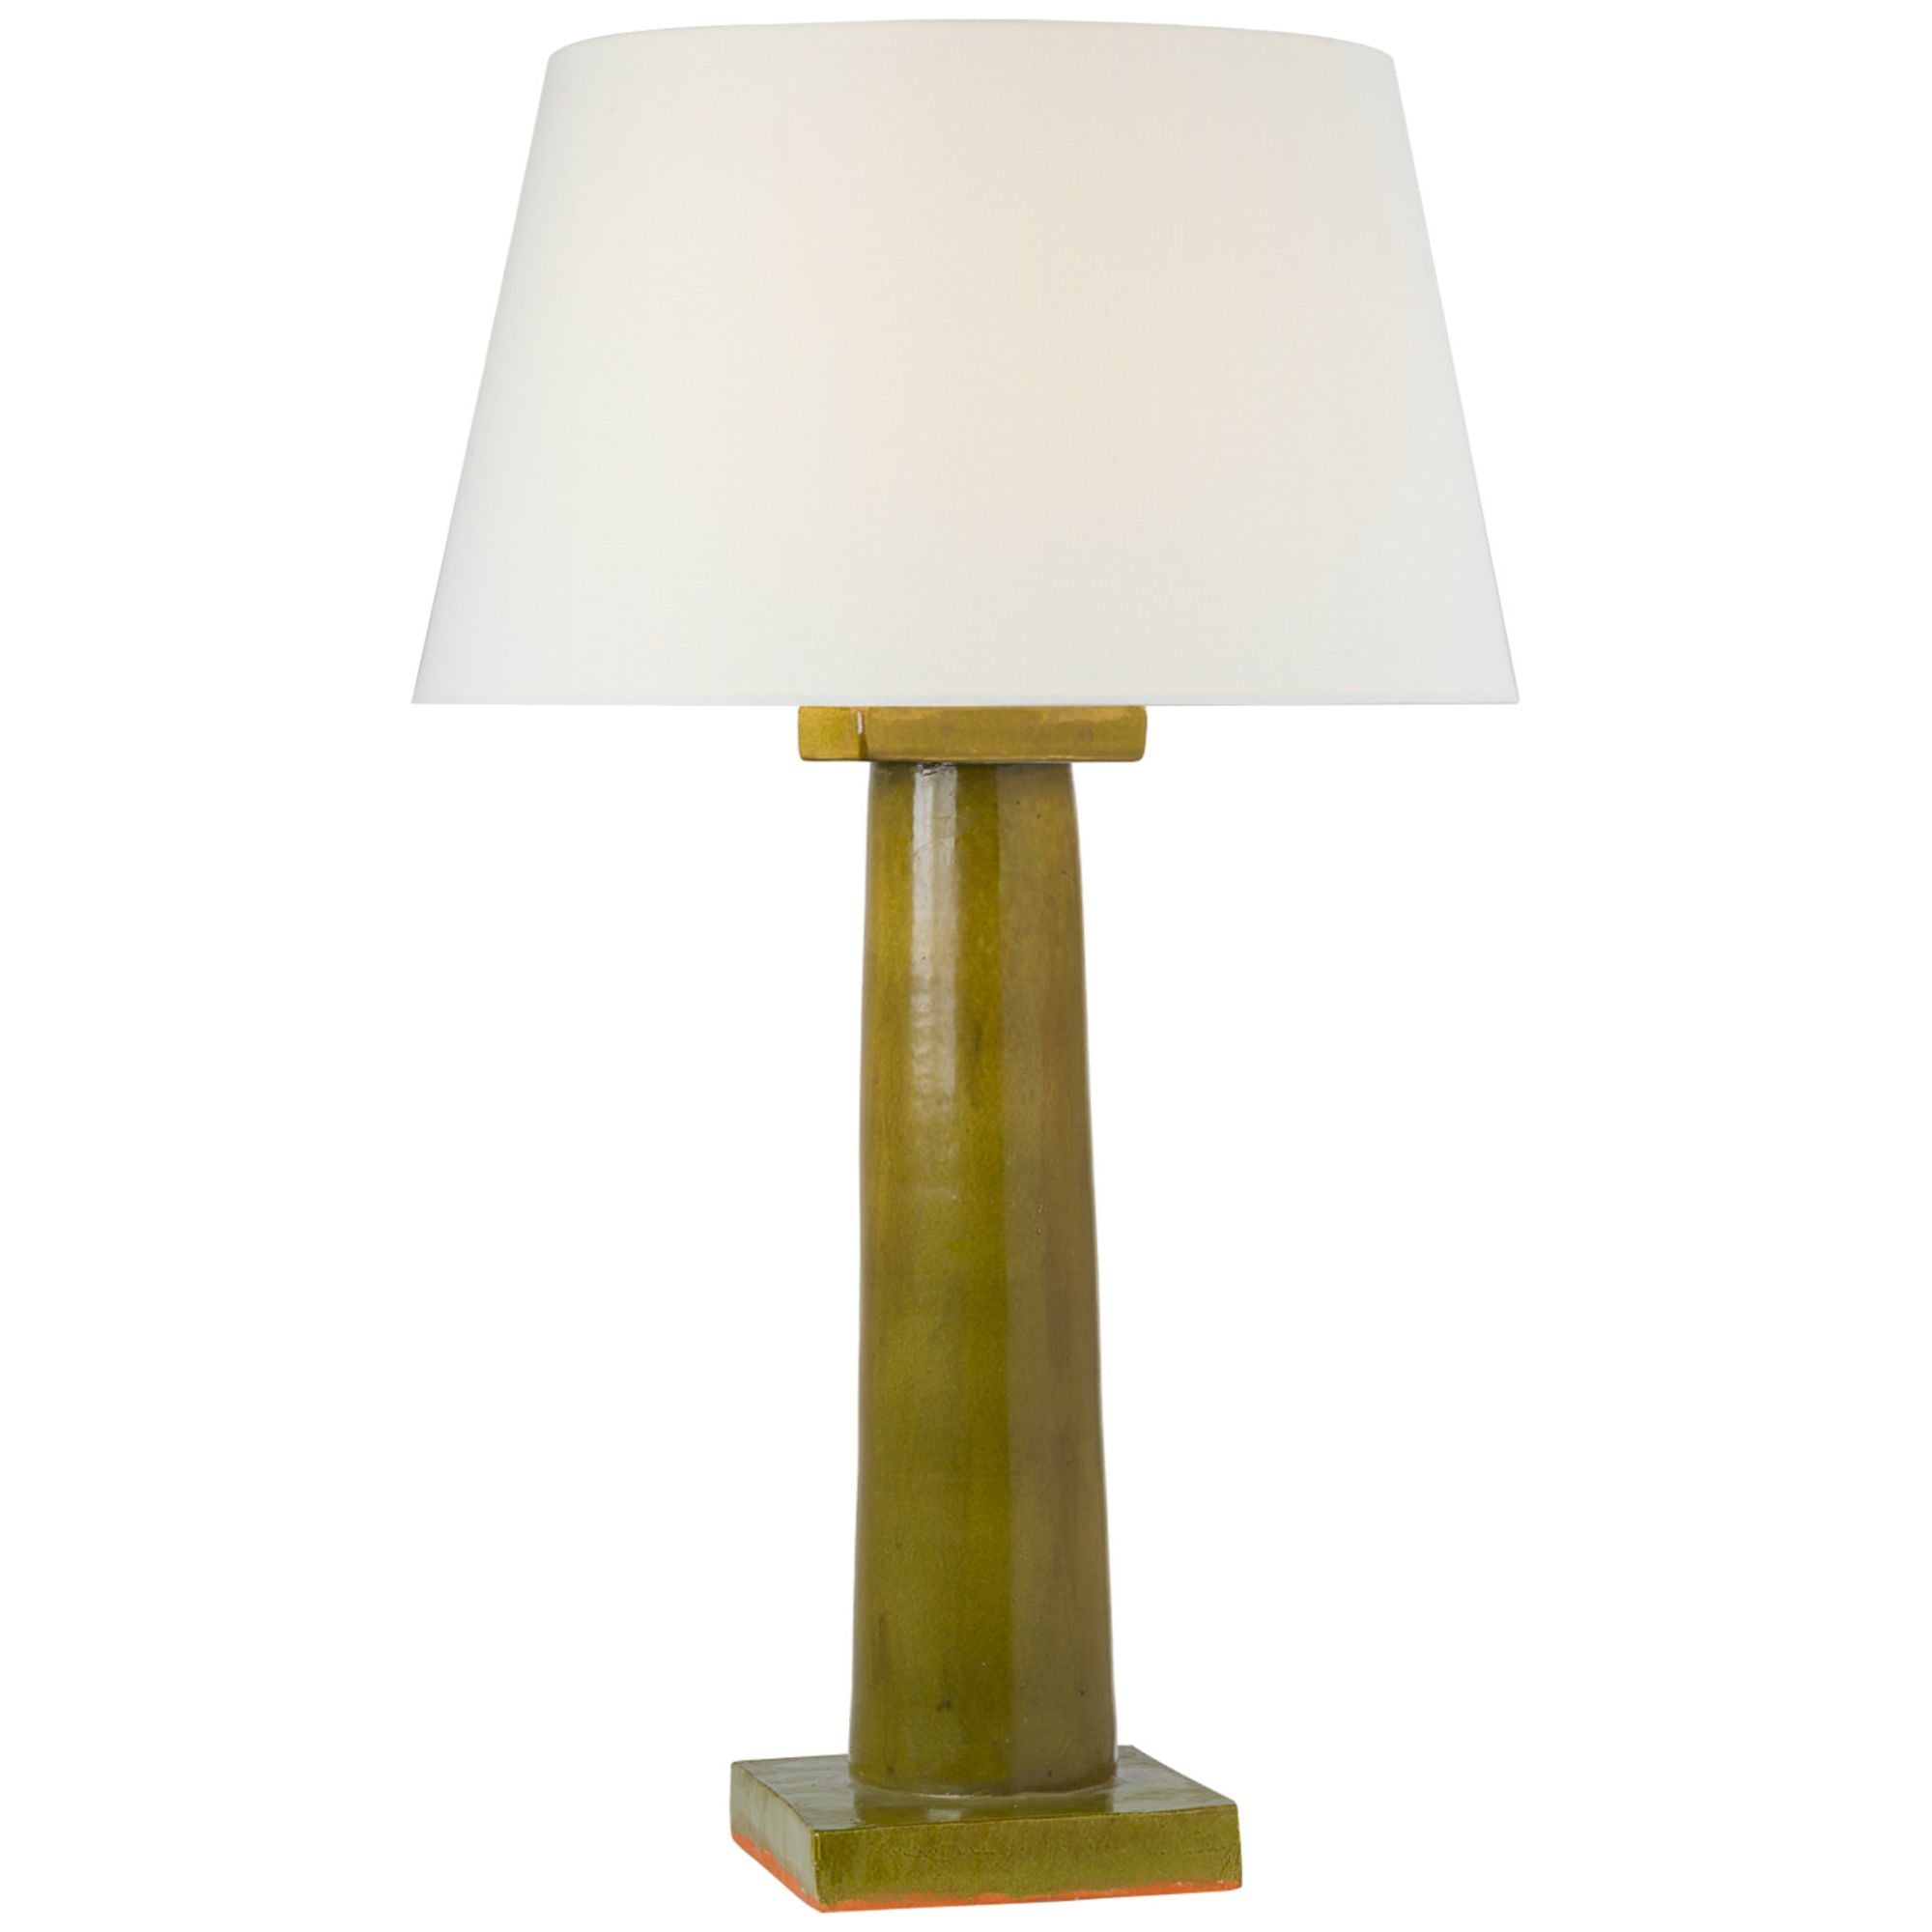 Chapman & Myers Colonne Large Balustrade Table Lamp in Moss Green with Linen Shade